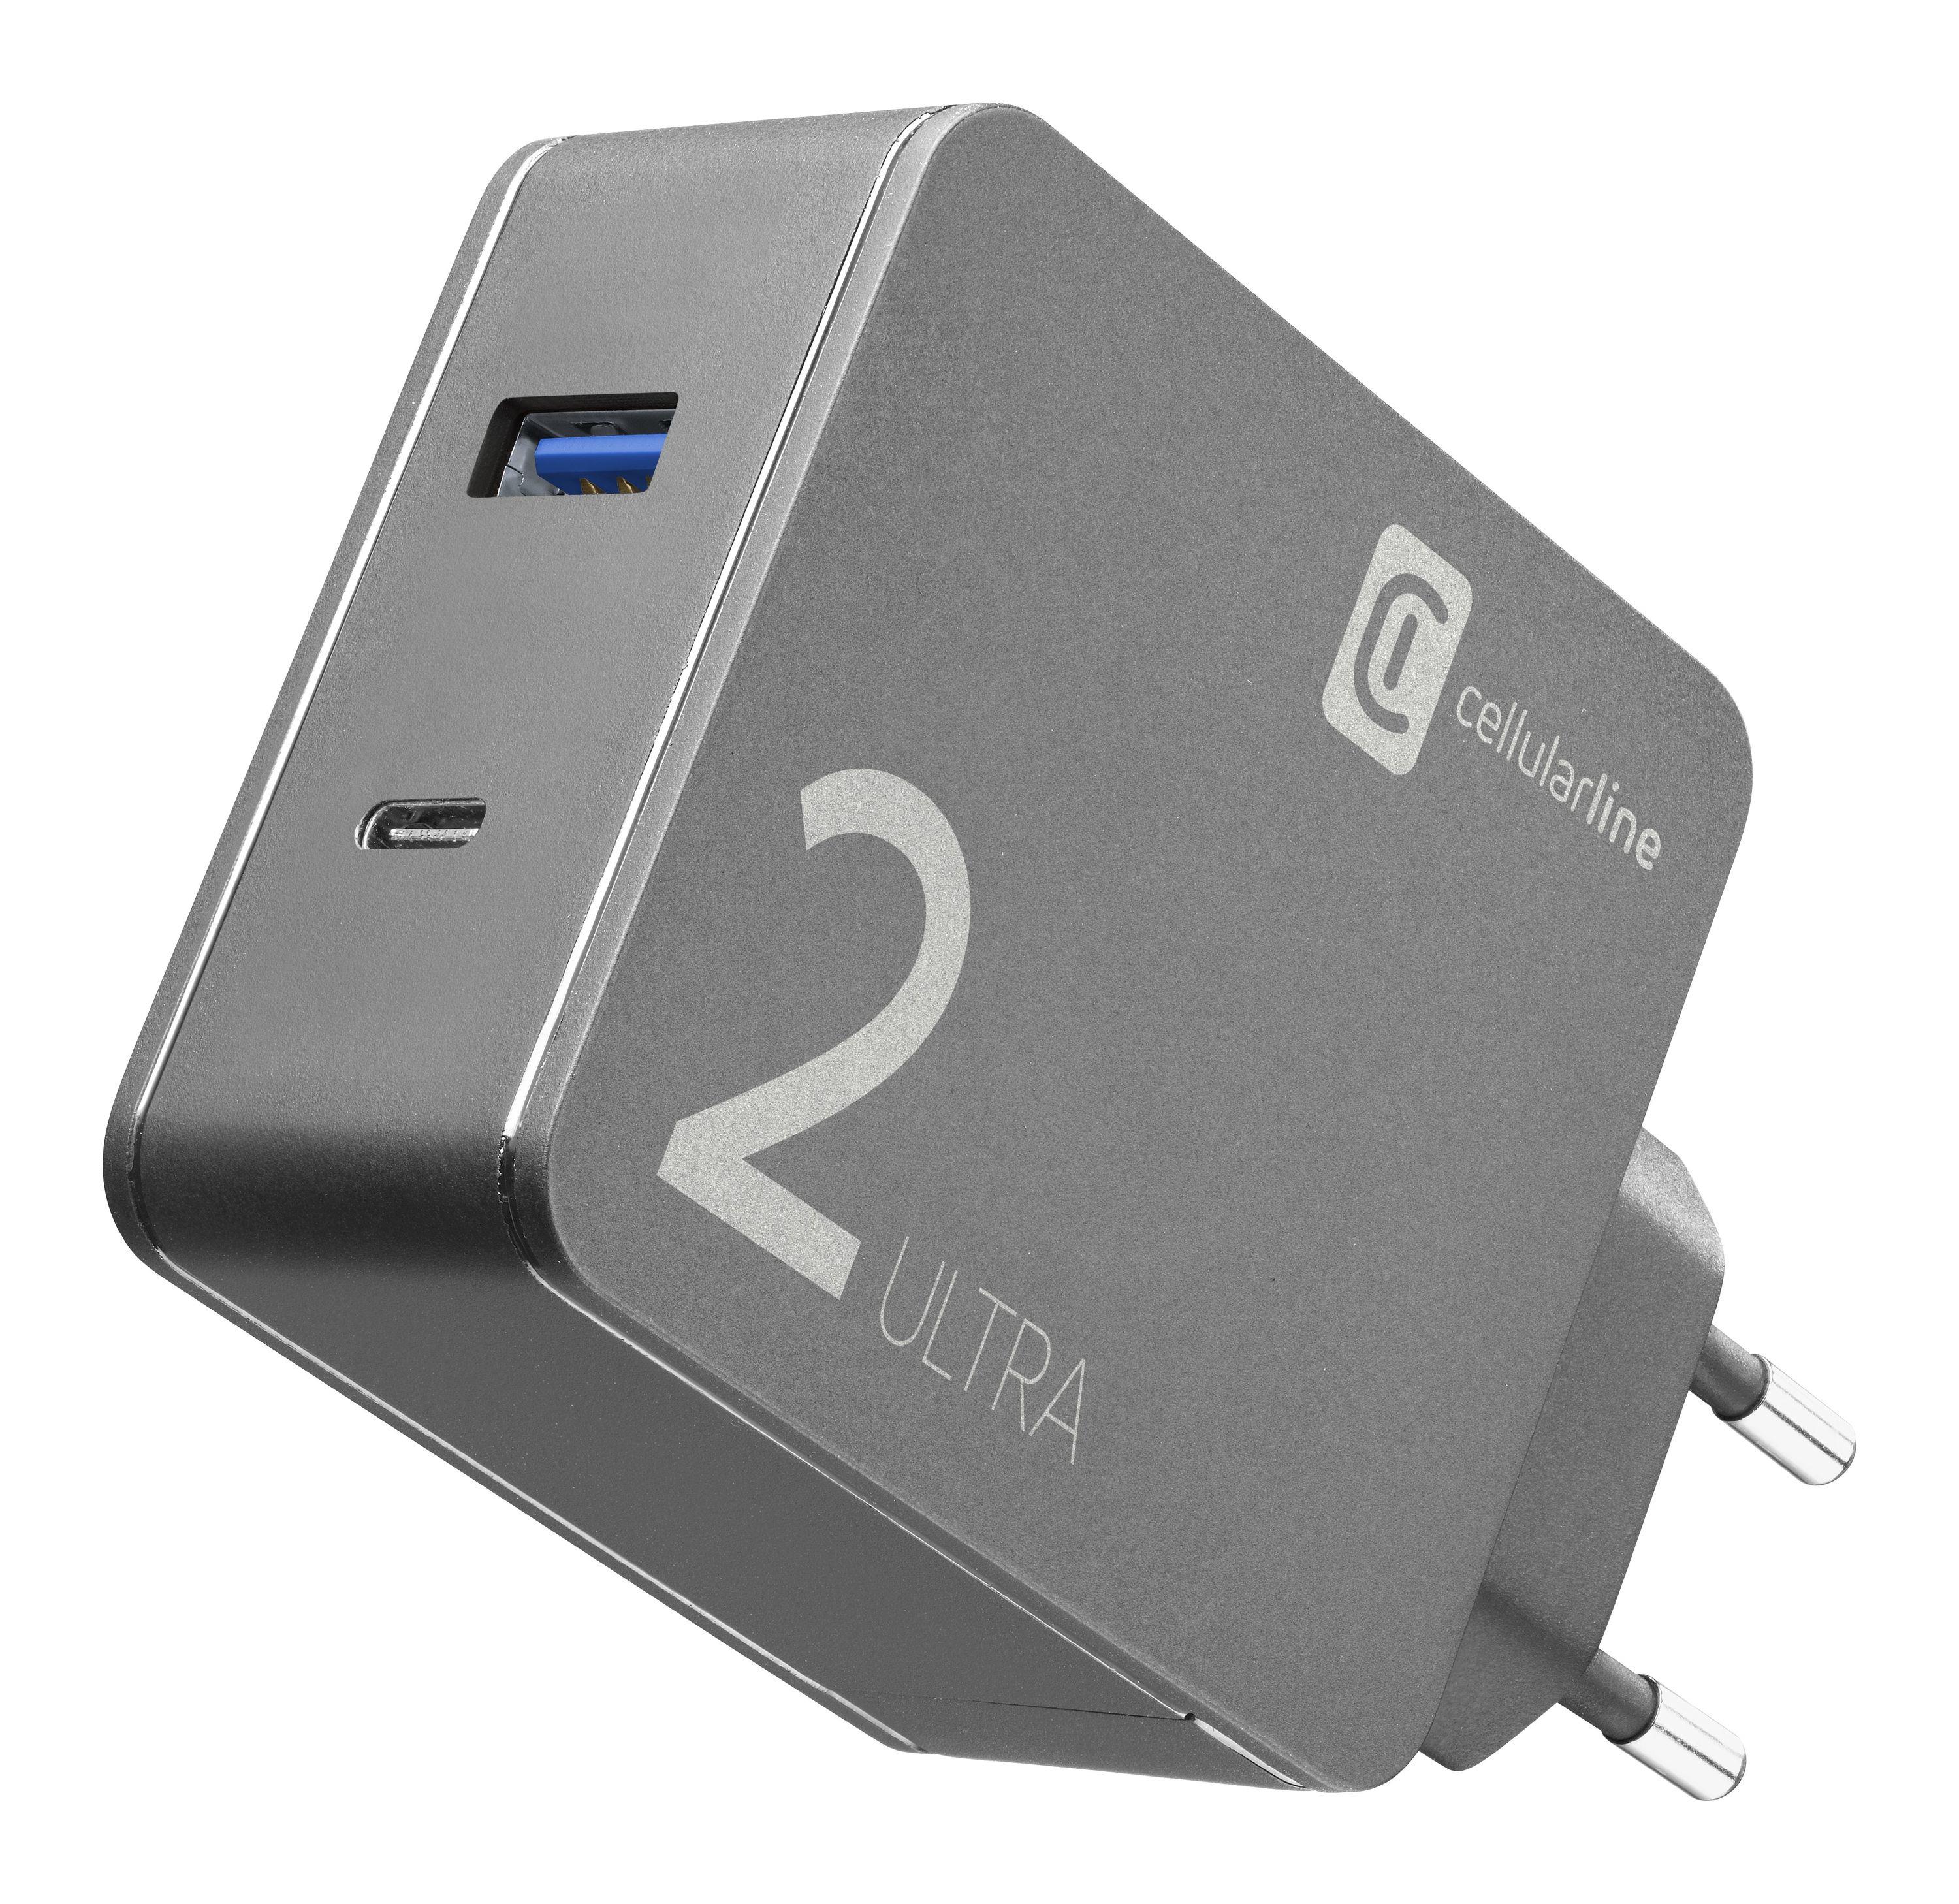 Cellular Line Duo Charger